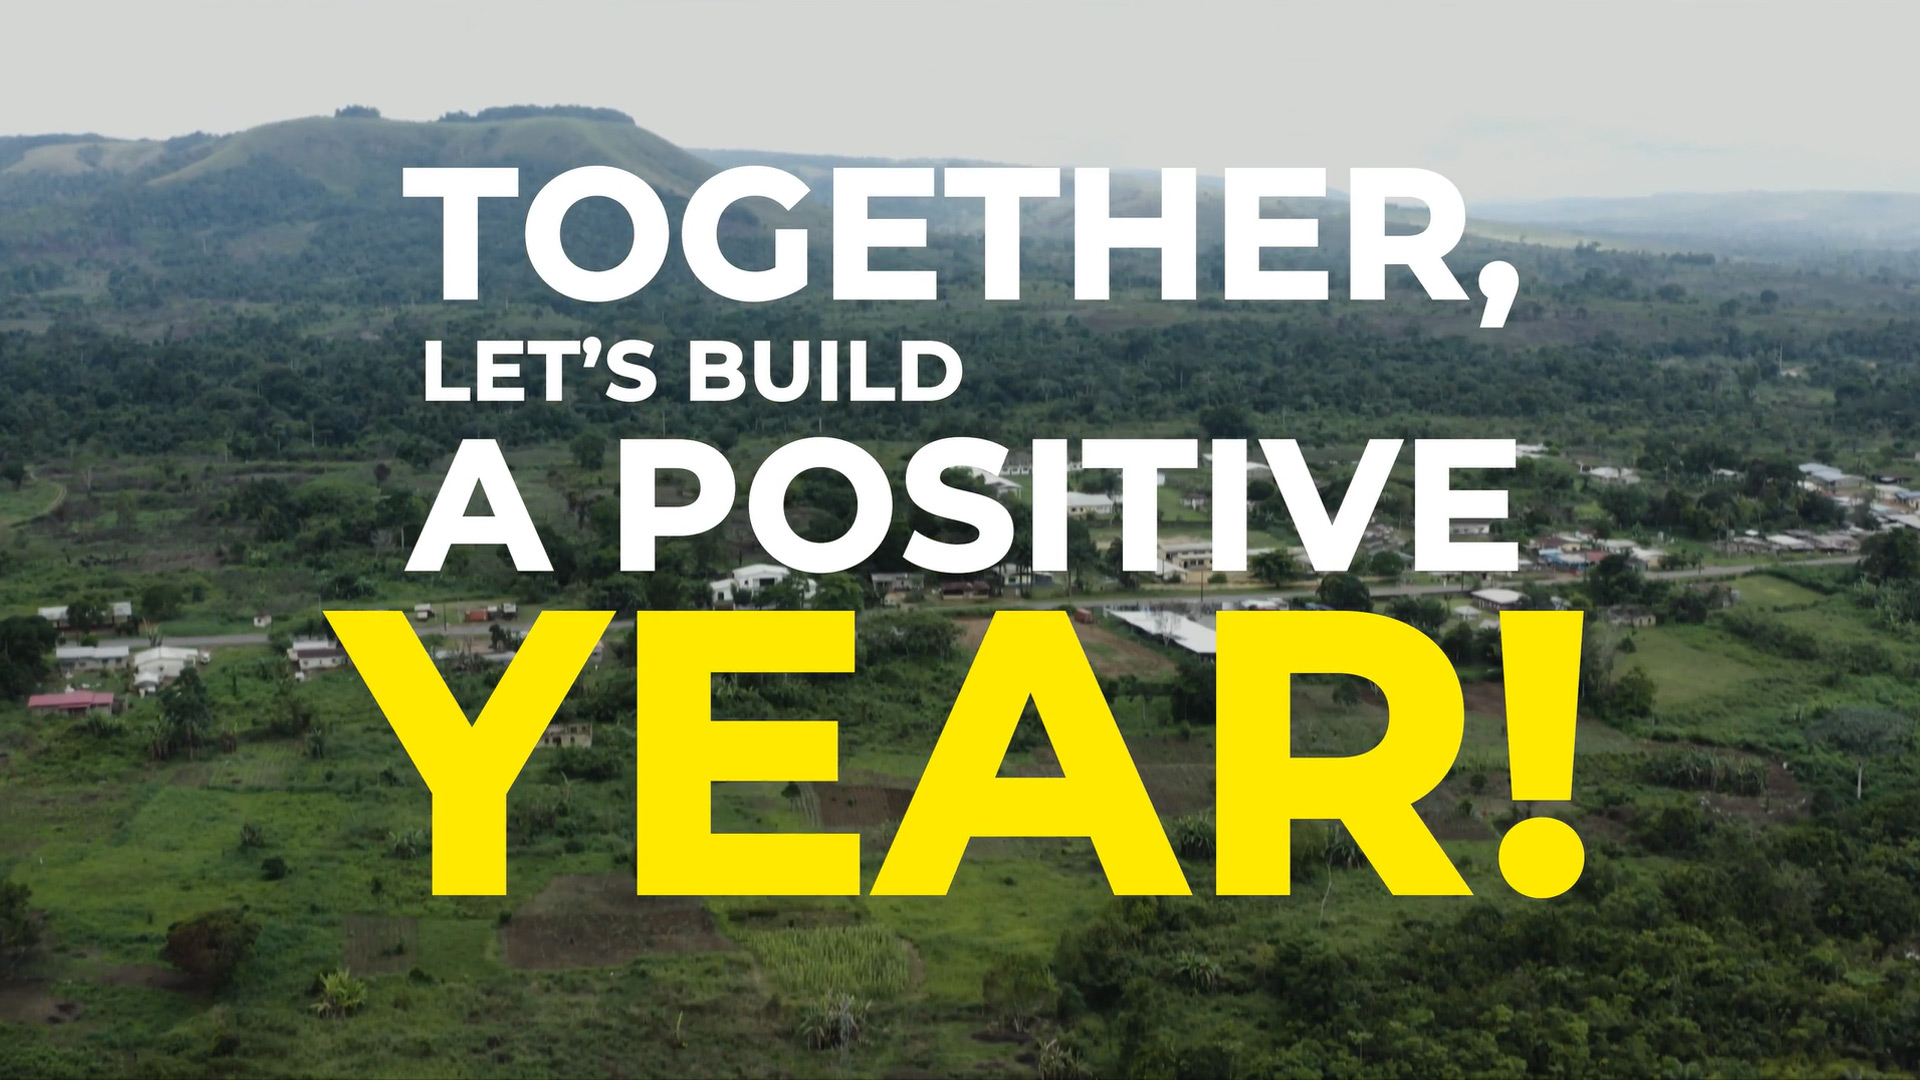 Together let's build a positive year